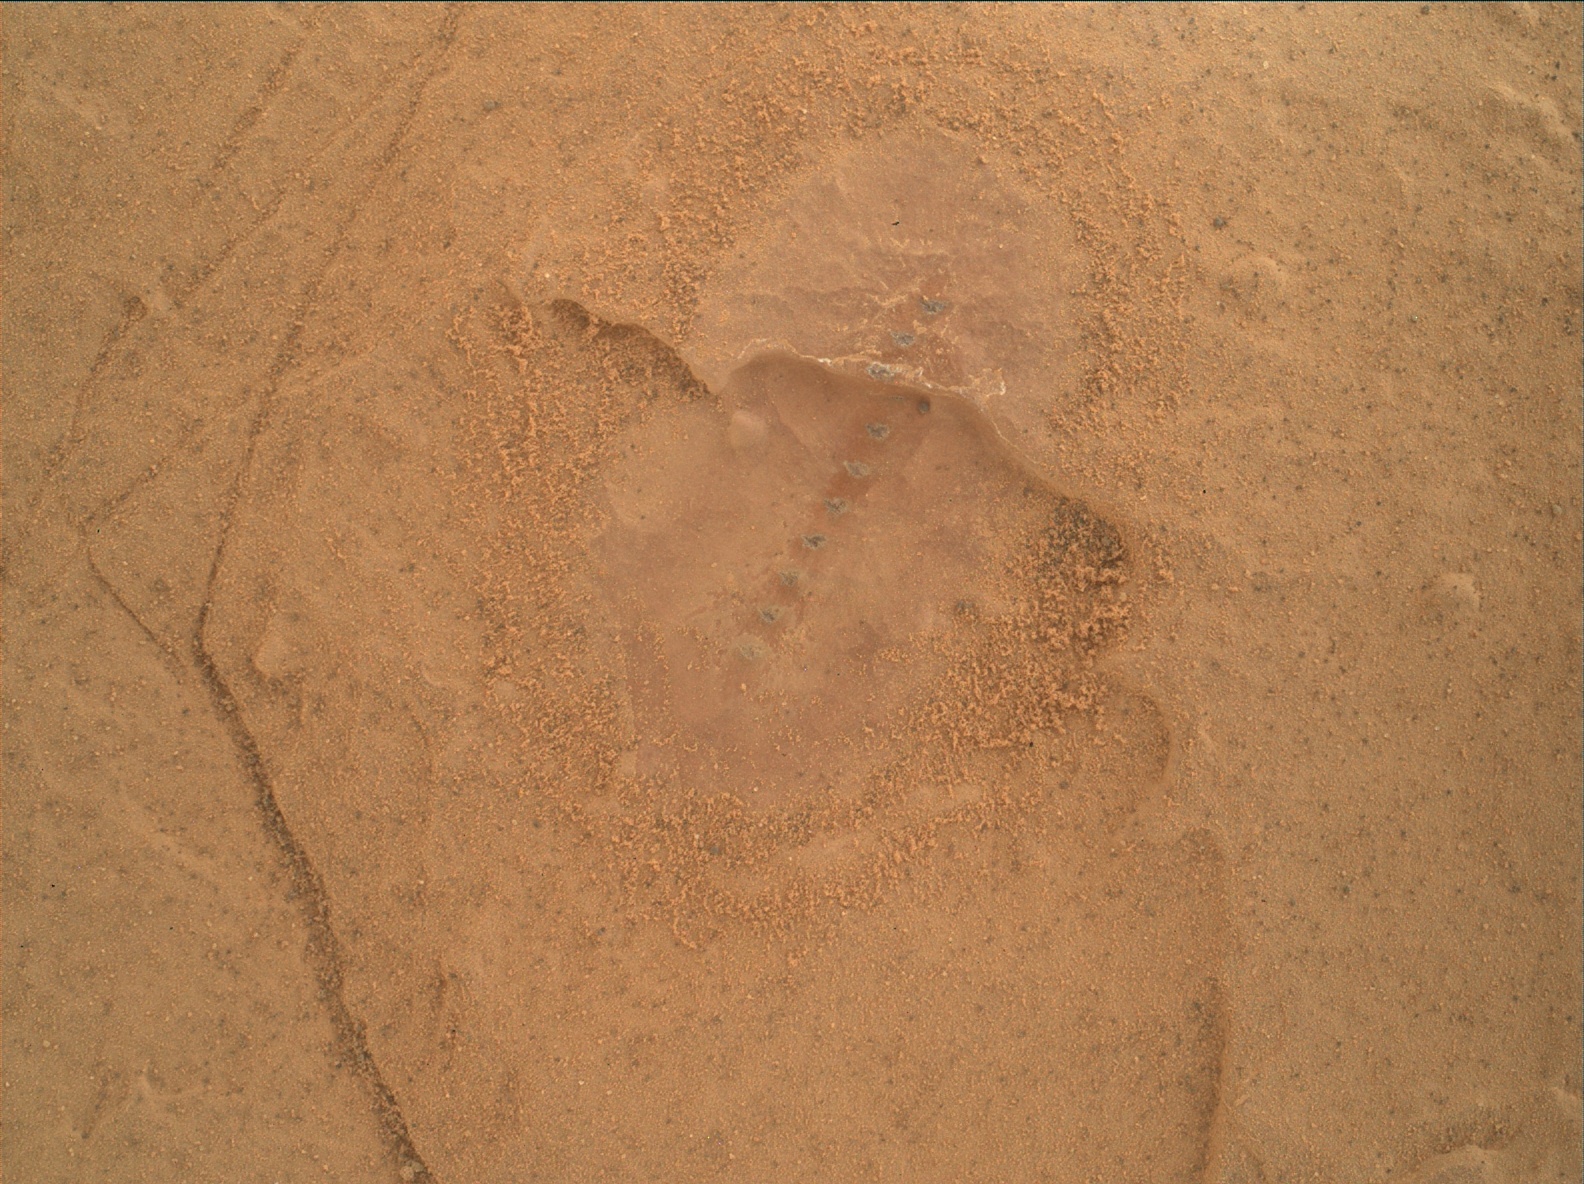 Nasa's Mars rover Curiosity acquired this image using its Mars Hand Lens Imager (MAHLI) on Sol 1834